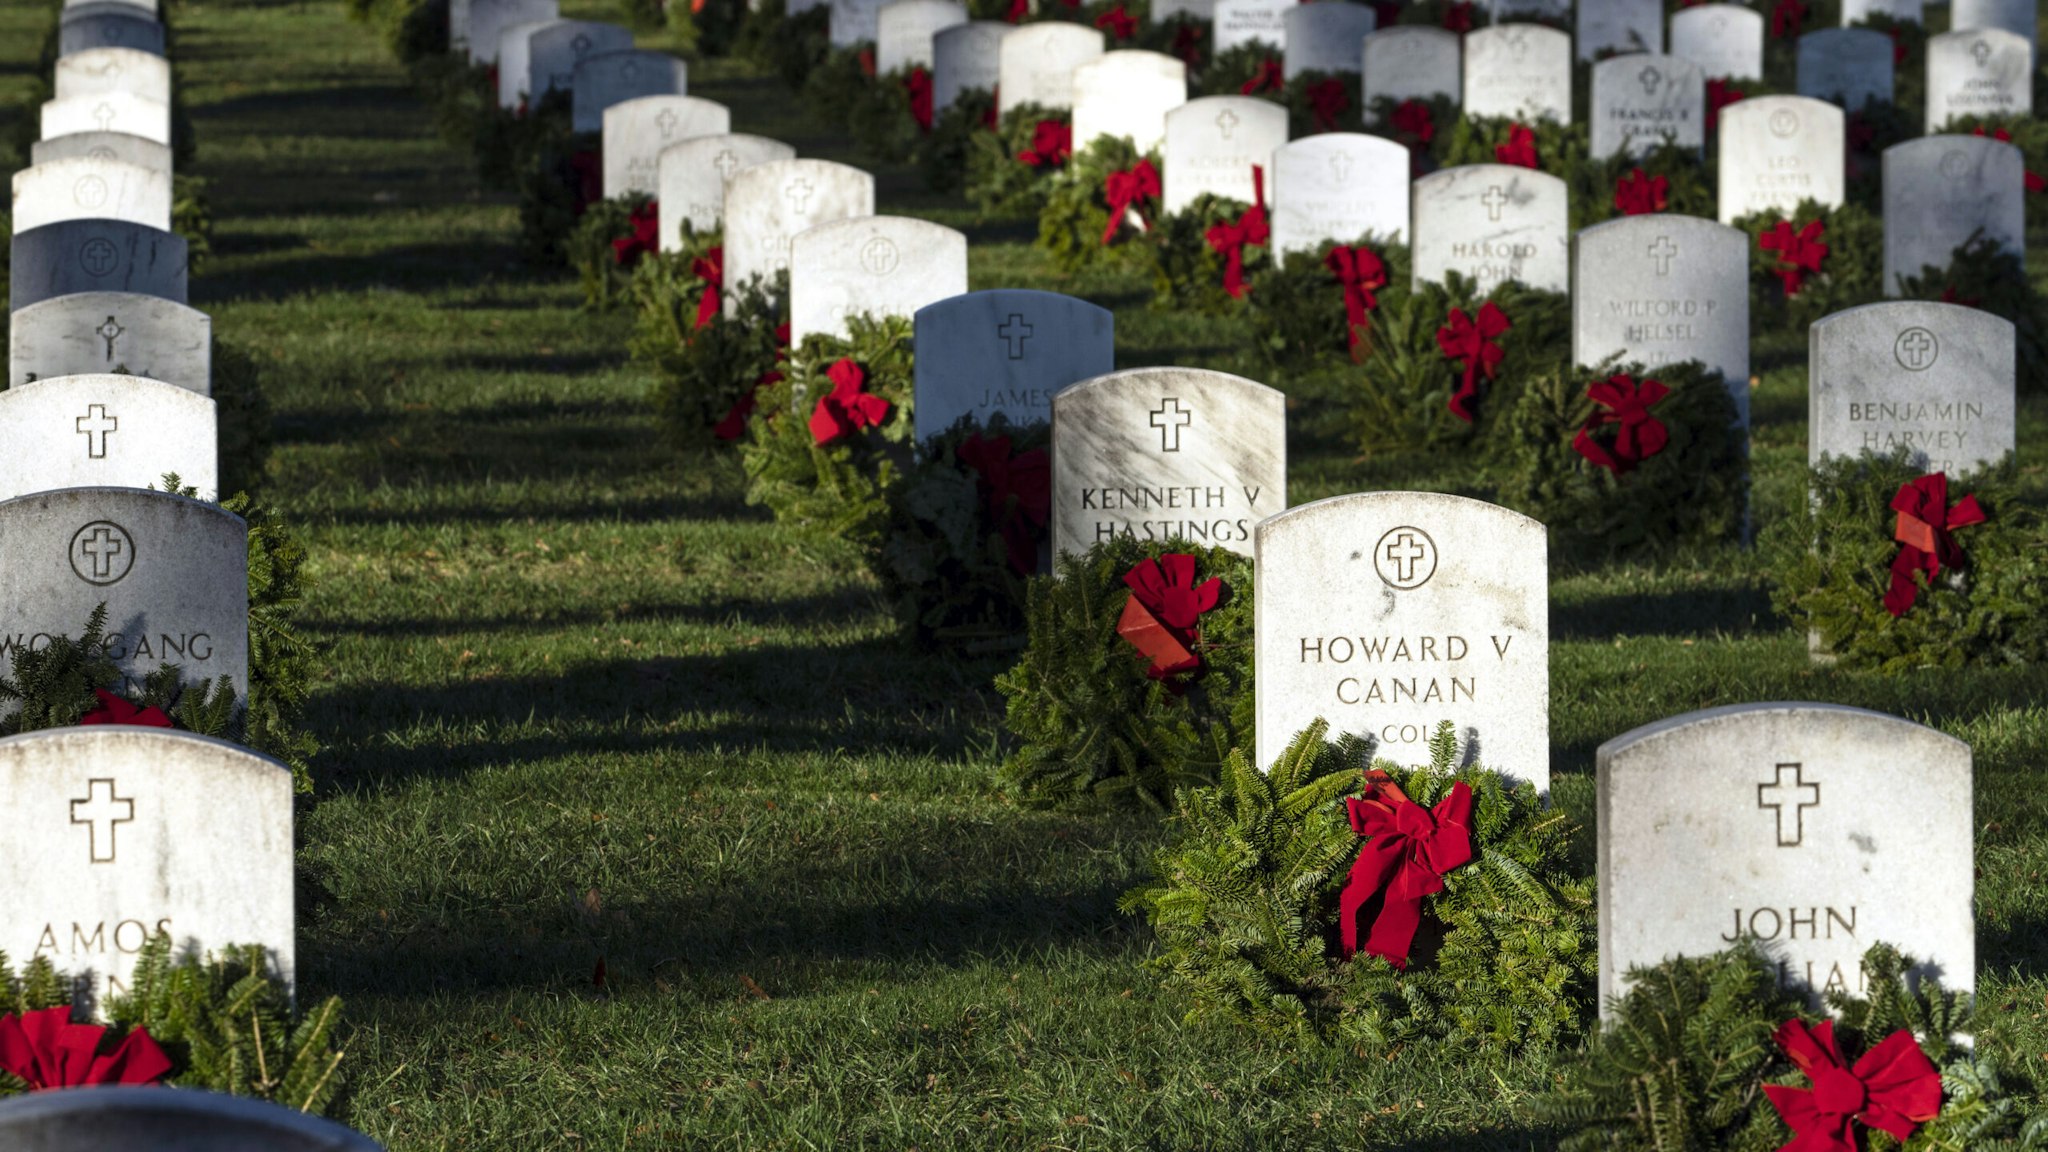 ARLINGTON, VIRGINIA - DECEMBER 17: Christmas wreaths placed by volunteers sit in front of headstones at Arlington National Cemetery on December 17, 2022 in Arlington, Virginia. Thousands of volunteers participated in Wreaths Across America Day, laying wreaths at headstones at Arlington National Cemetery to honor fallen service members. Over 3000 other locations across America, at sea and abroad also participate in the annual event.